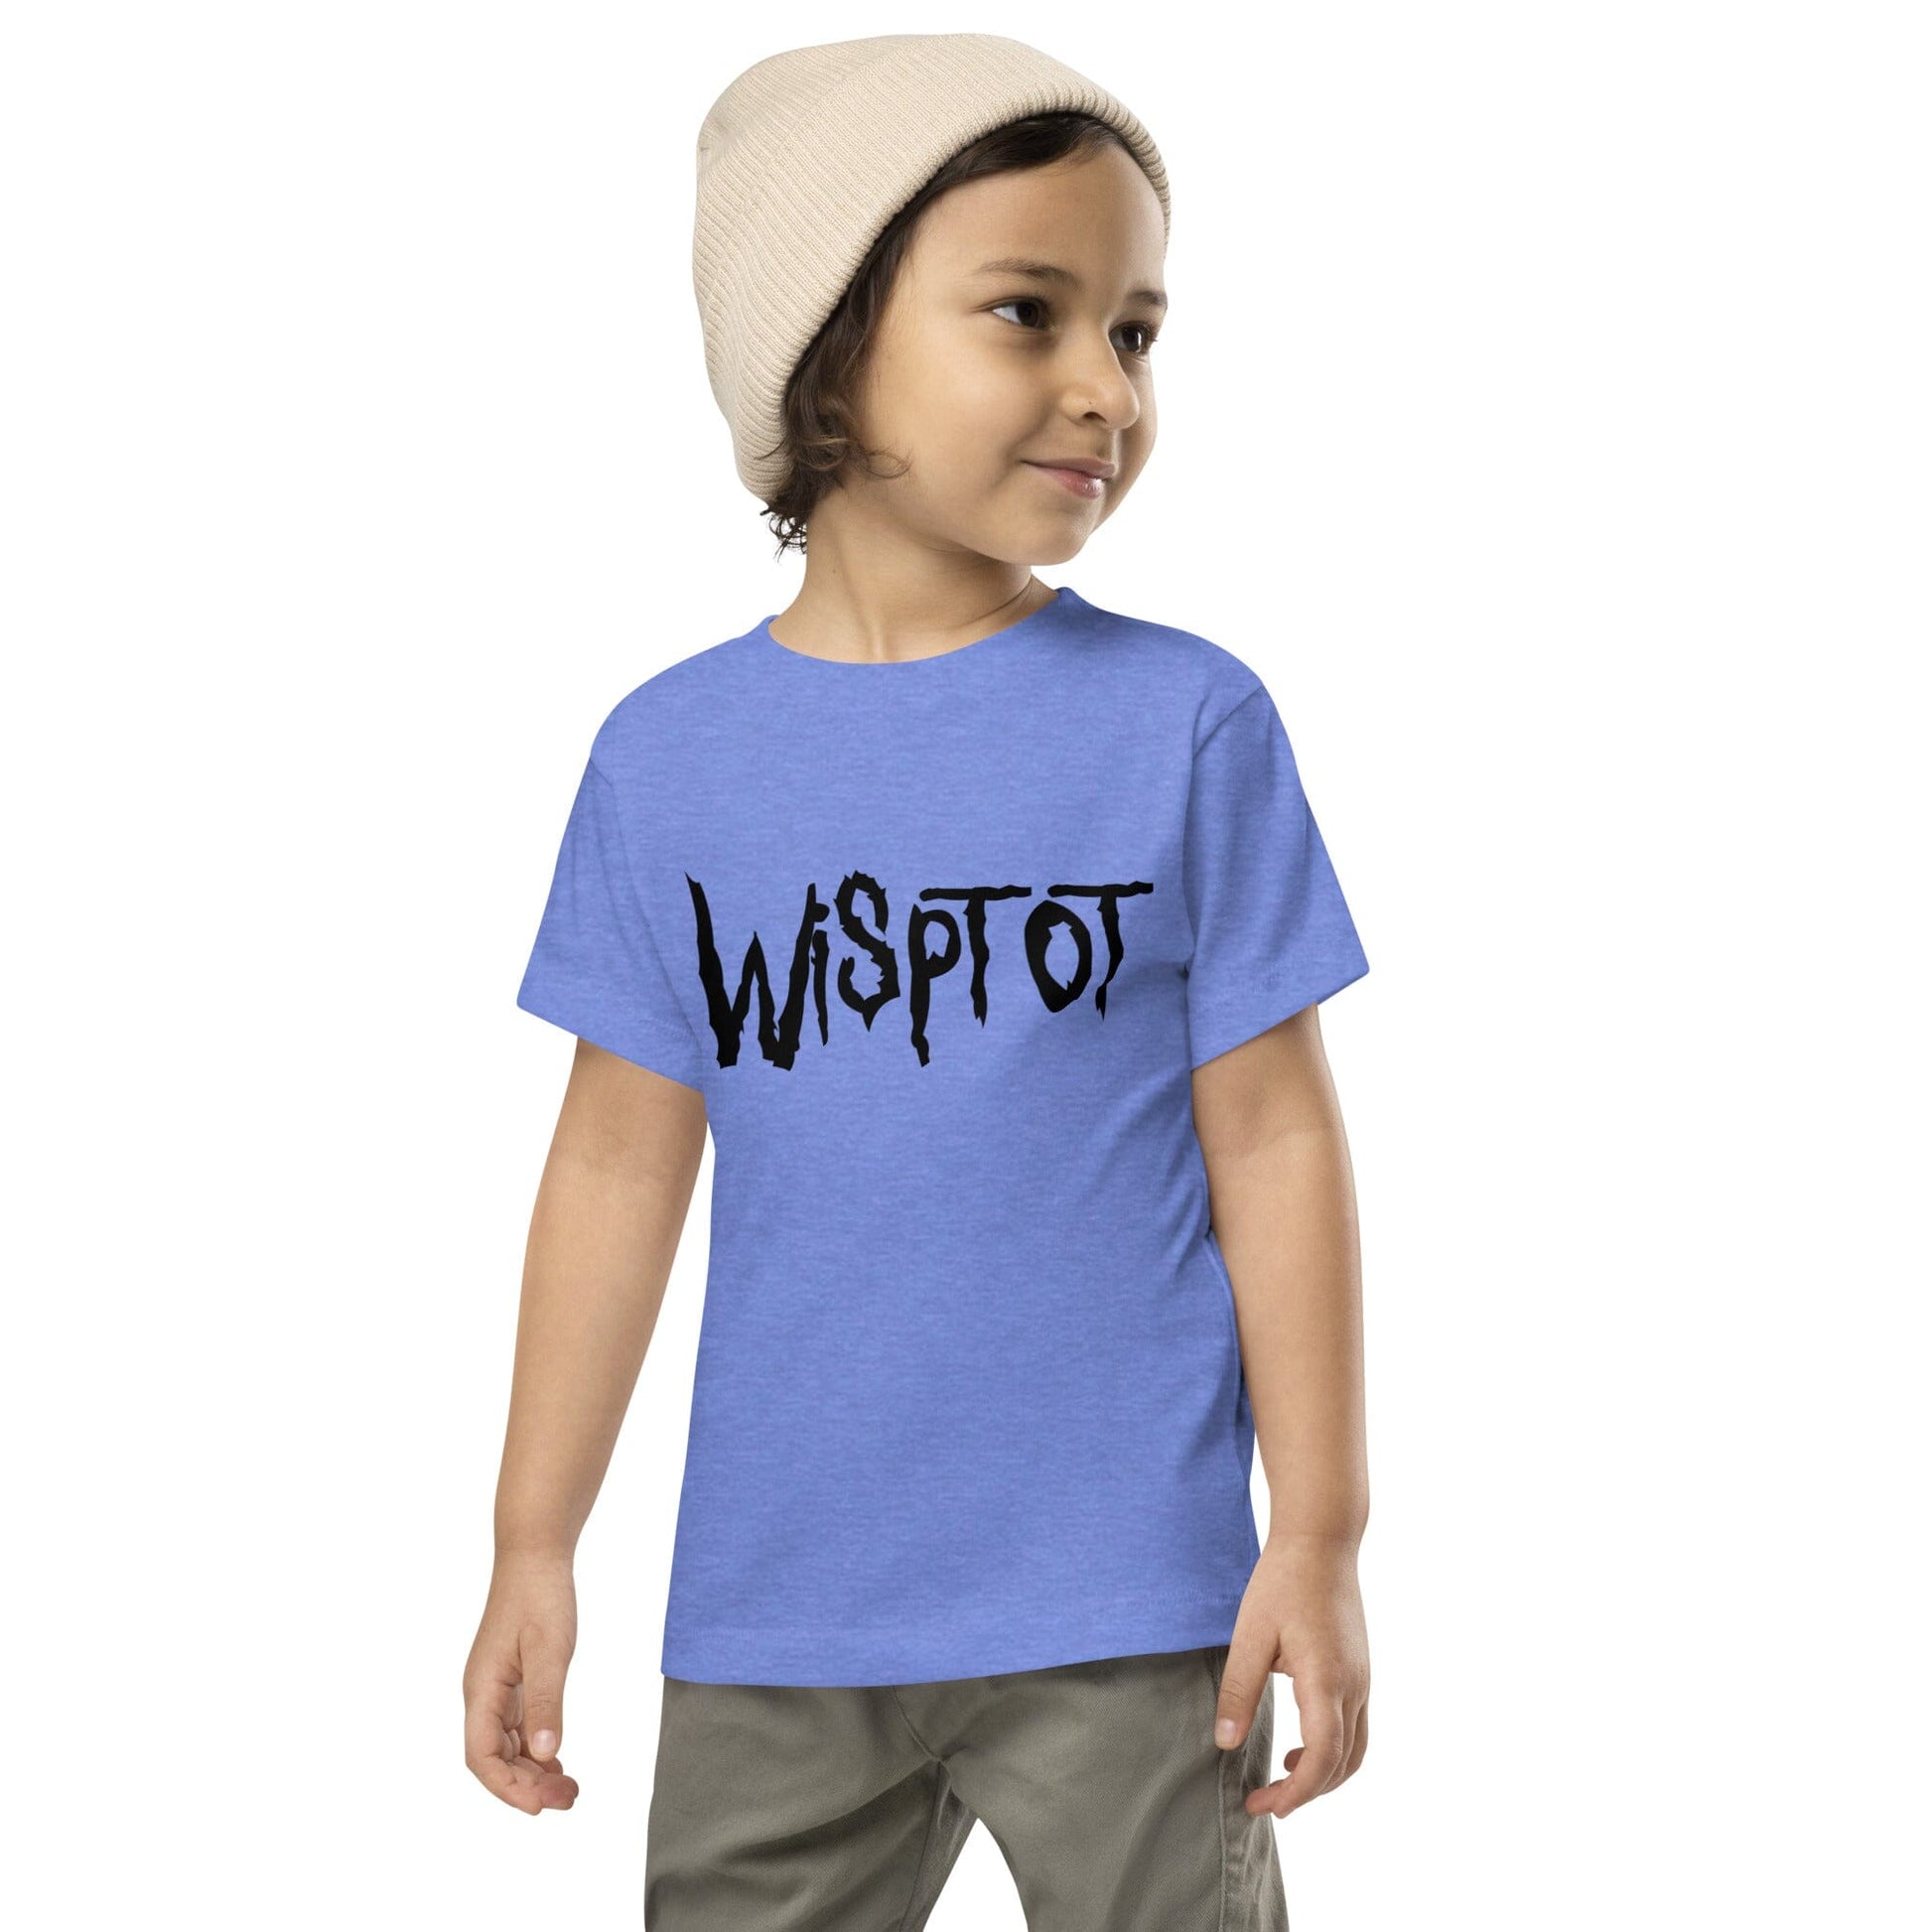 WispTot TODDLER T-Shirt [Unfoiled] (All net proceeds go to equally to Kitty CrusAIDe and Rags to Riches Animal Rescue) JoyousJoyfulJoyness Heather Columbia Blue 2T 